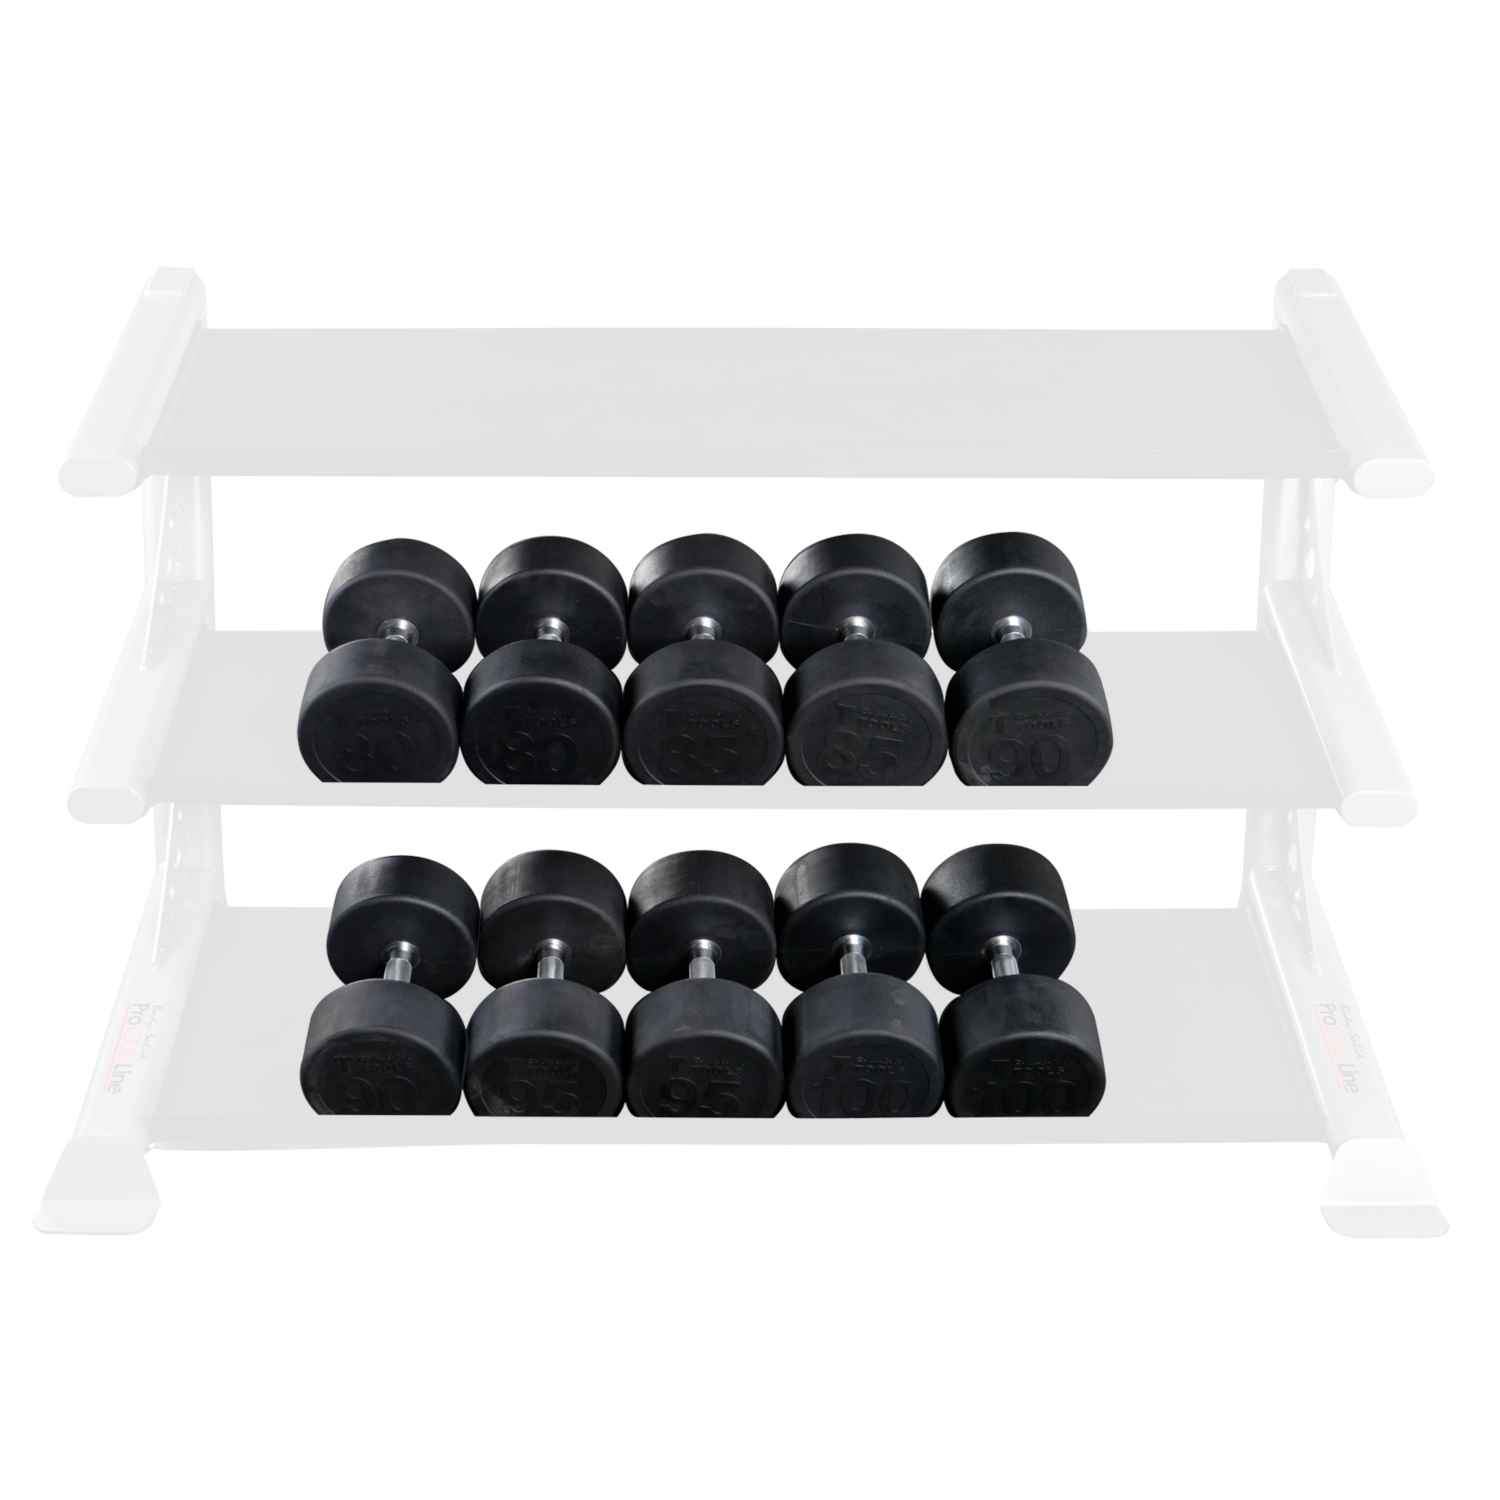 Body-Solid Round Rubber Dumbbells dumbbell Body-Solid Iron 80 - 100 lb Pairs Set 